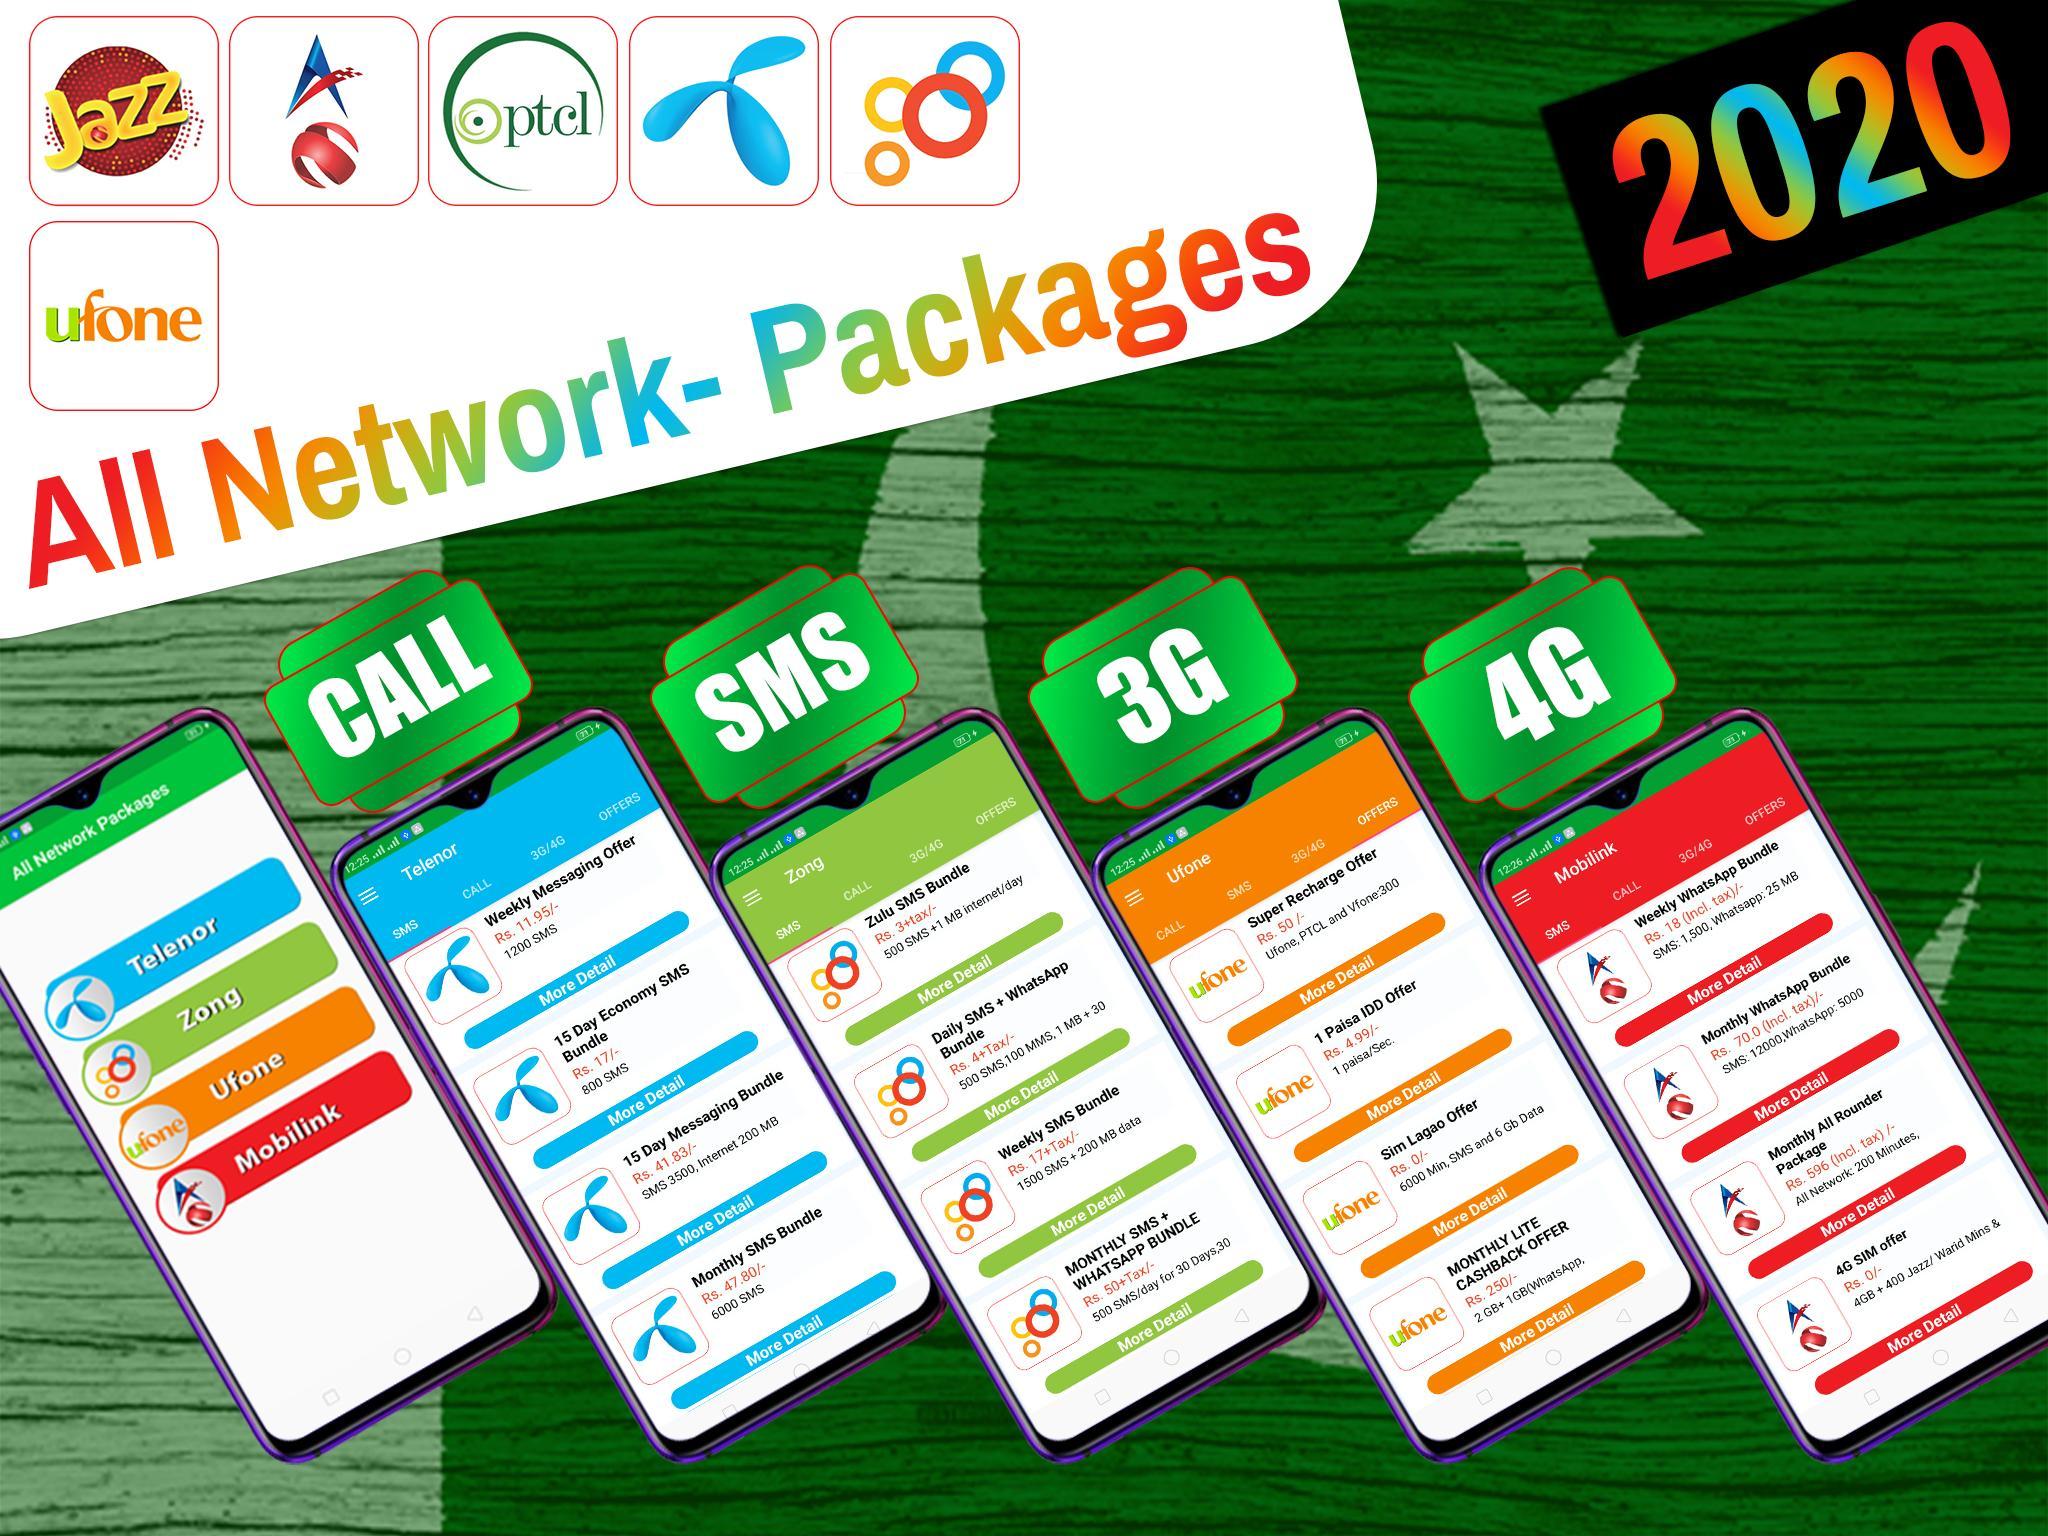 All Network Packages for Android - APK Download